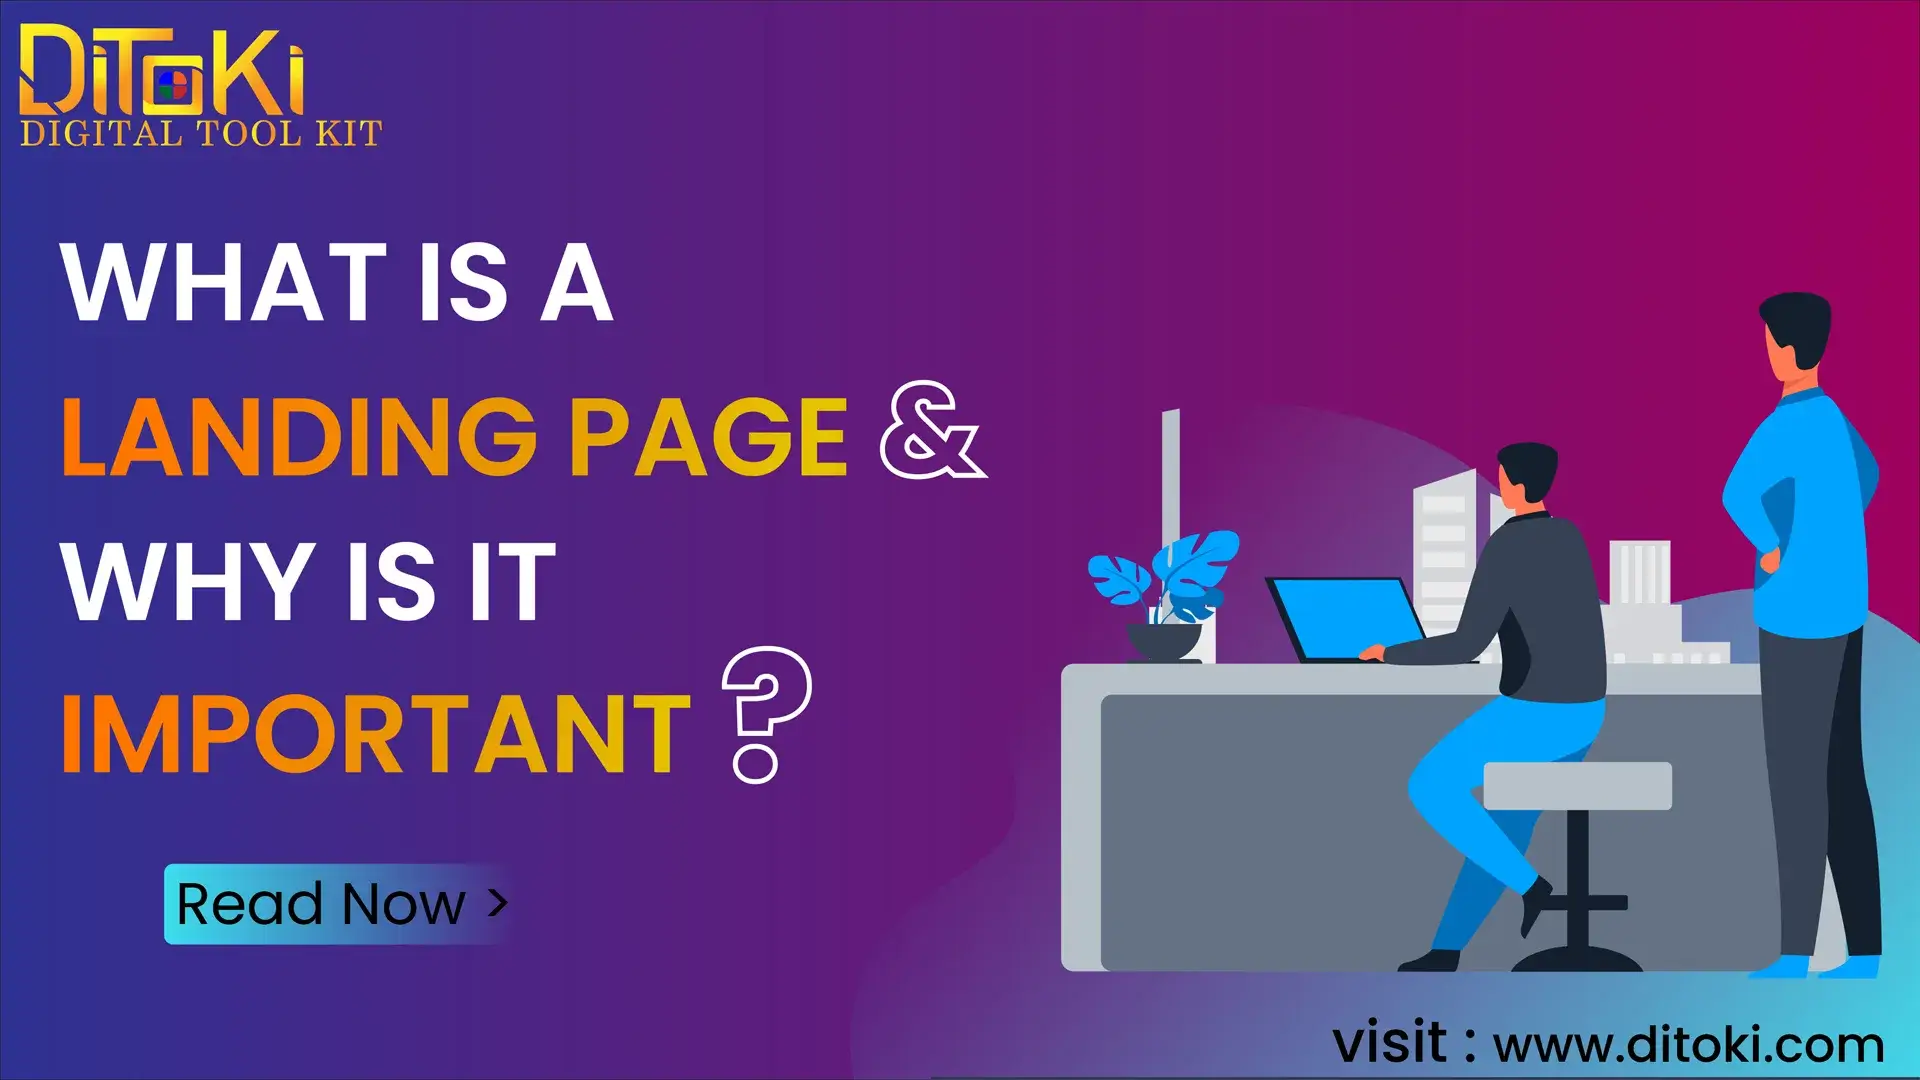 What is landing page